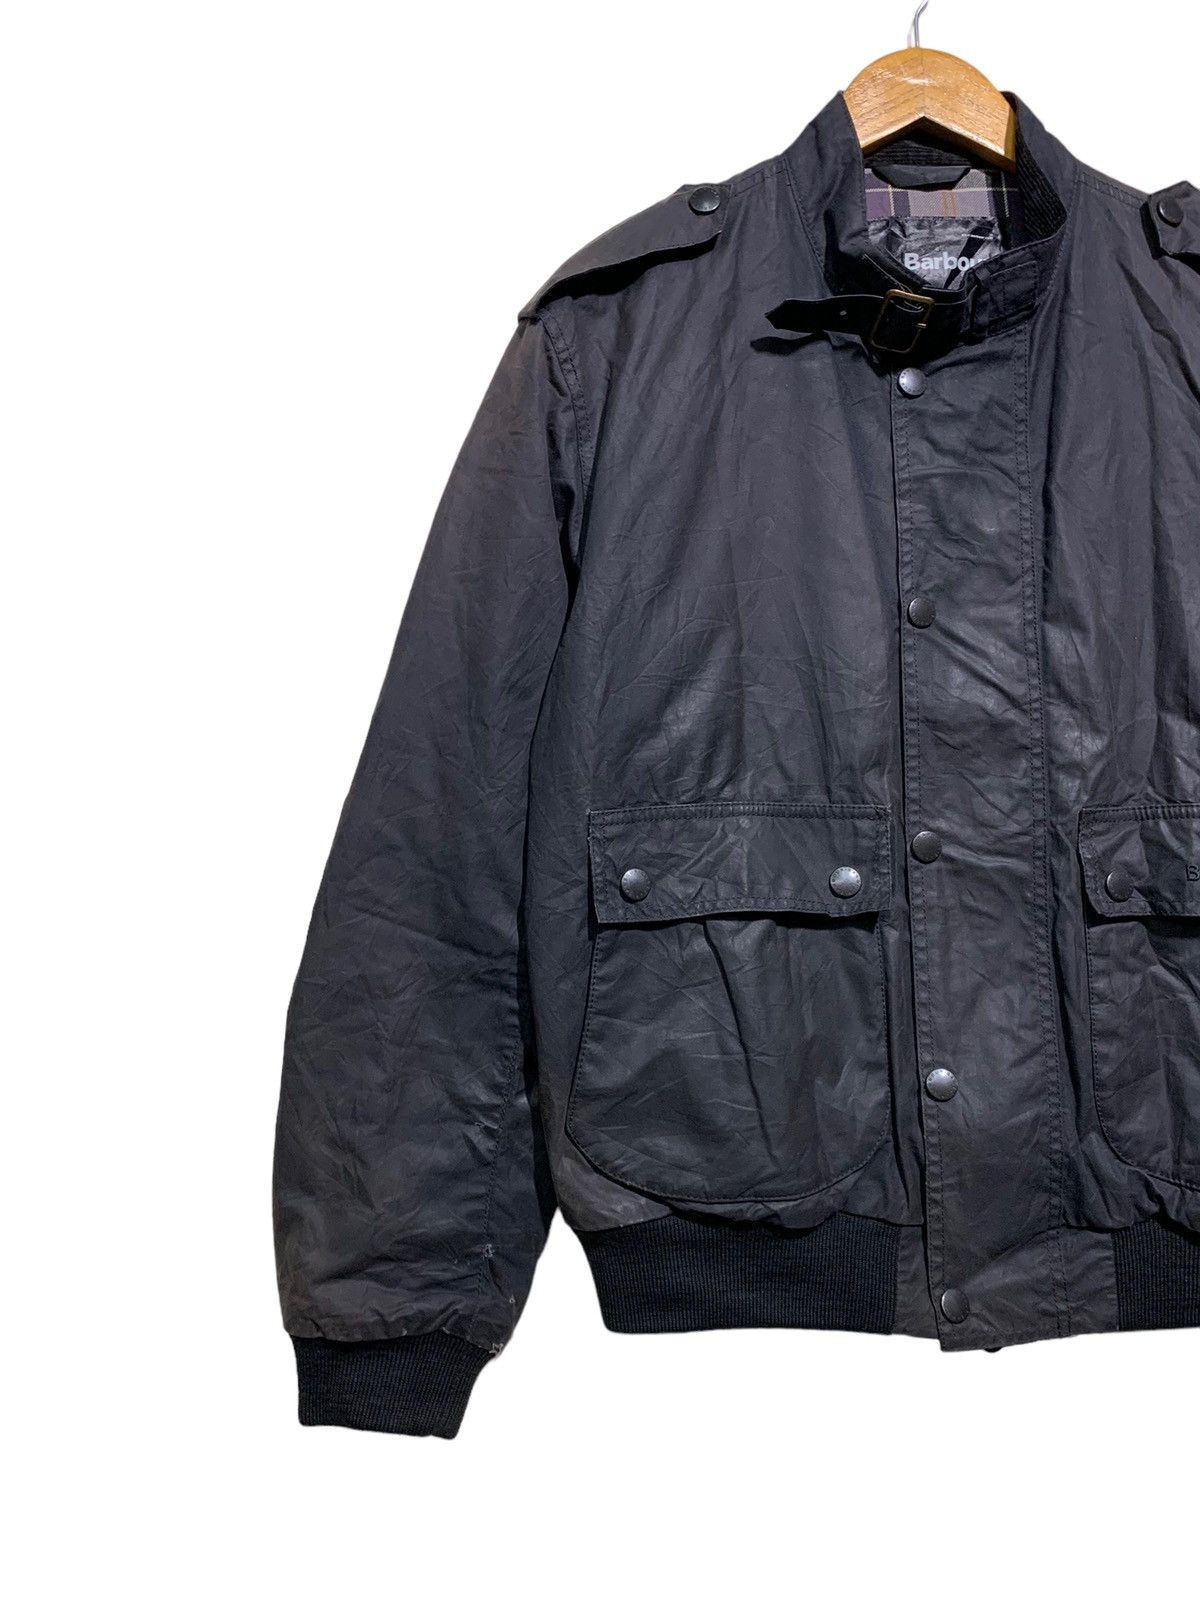 🔥BARBOUR INTERNATIONAL WAXED BOMBER JACKETS - 2